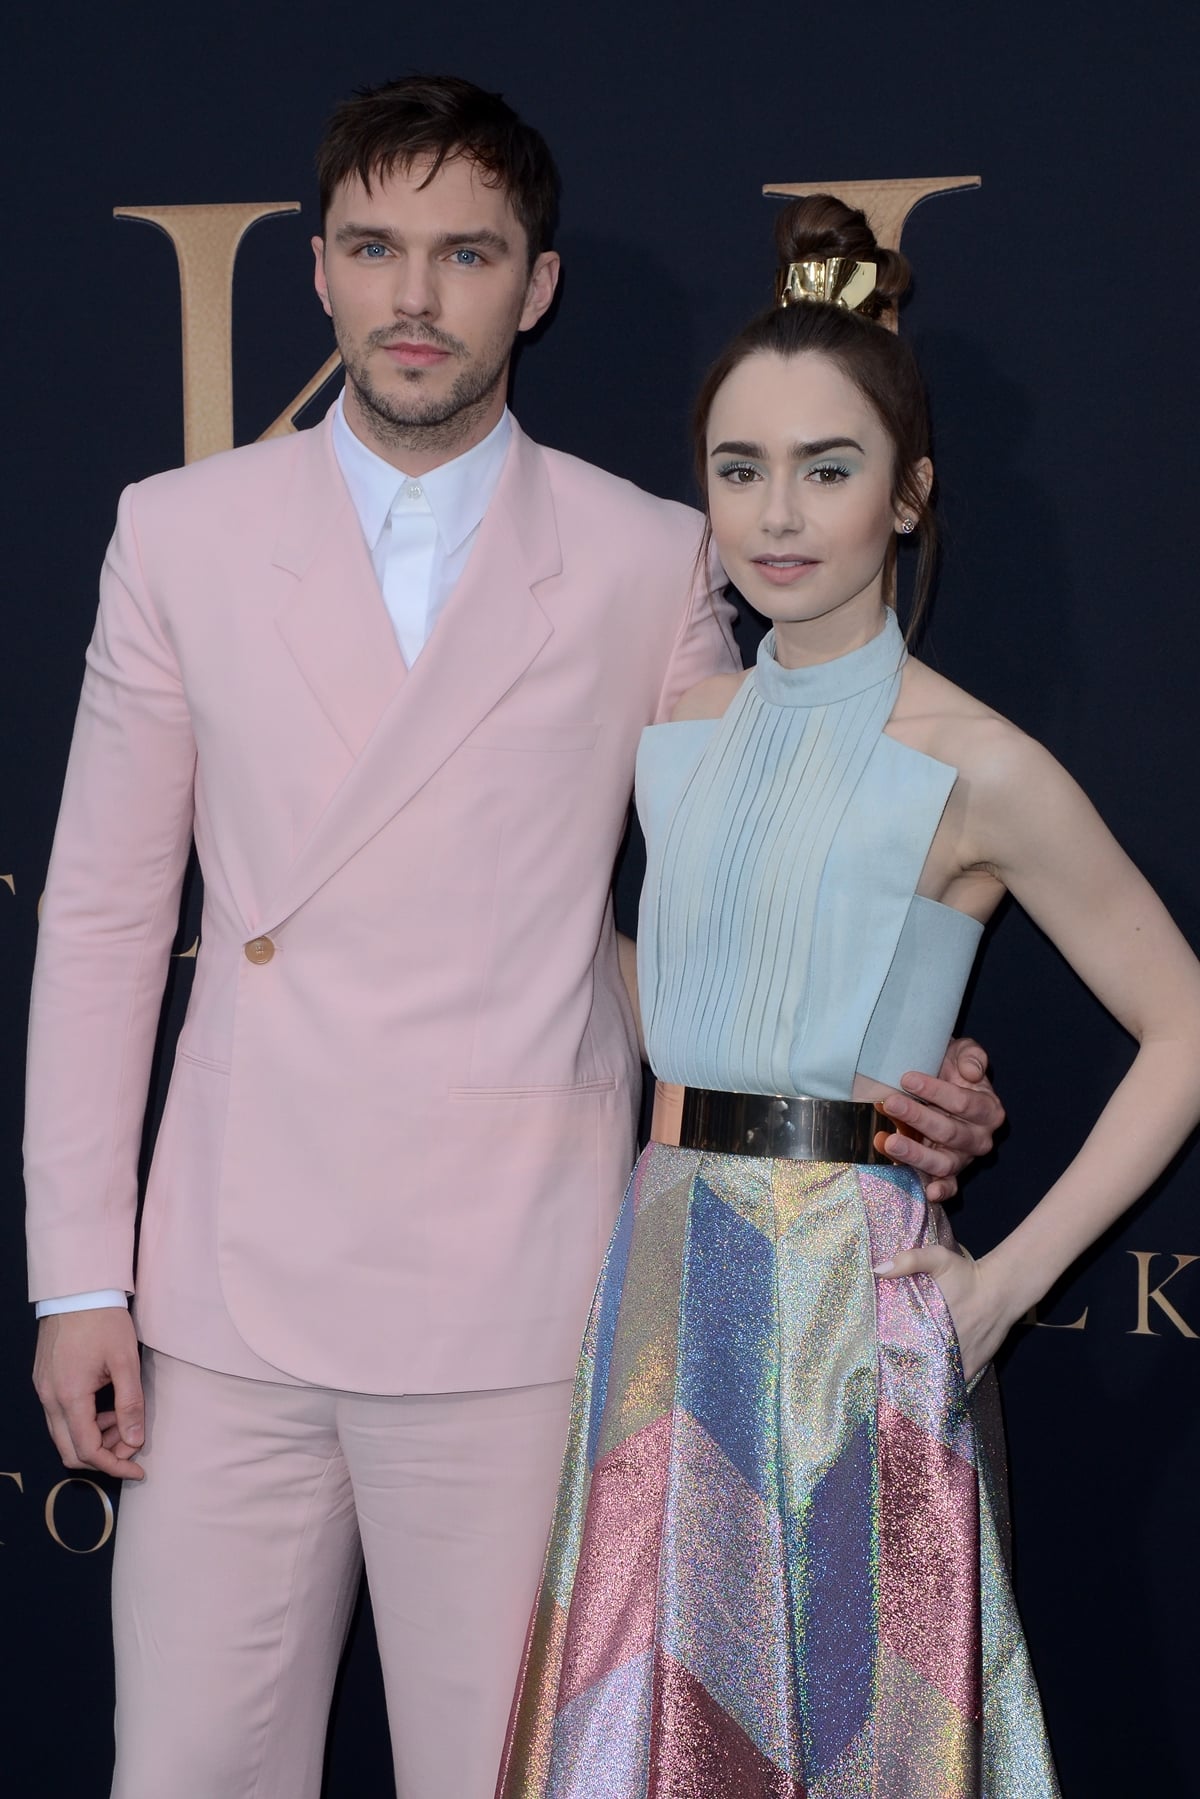 Nicholas Hoult is 10.5 inches taller than Lily Collins, with a height of 6ft 2 ½ (189.2 cm) compared to Lily's 5ft 4 (162.6 cm)